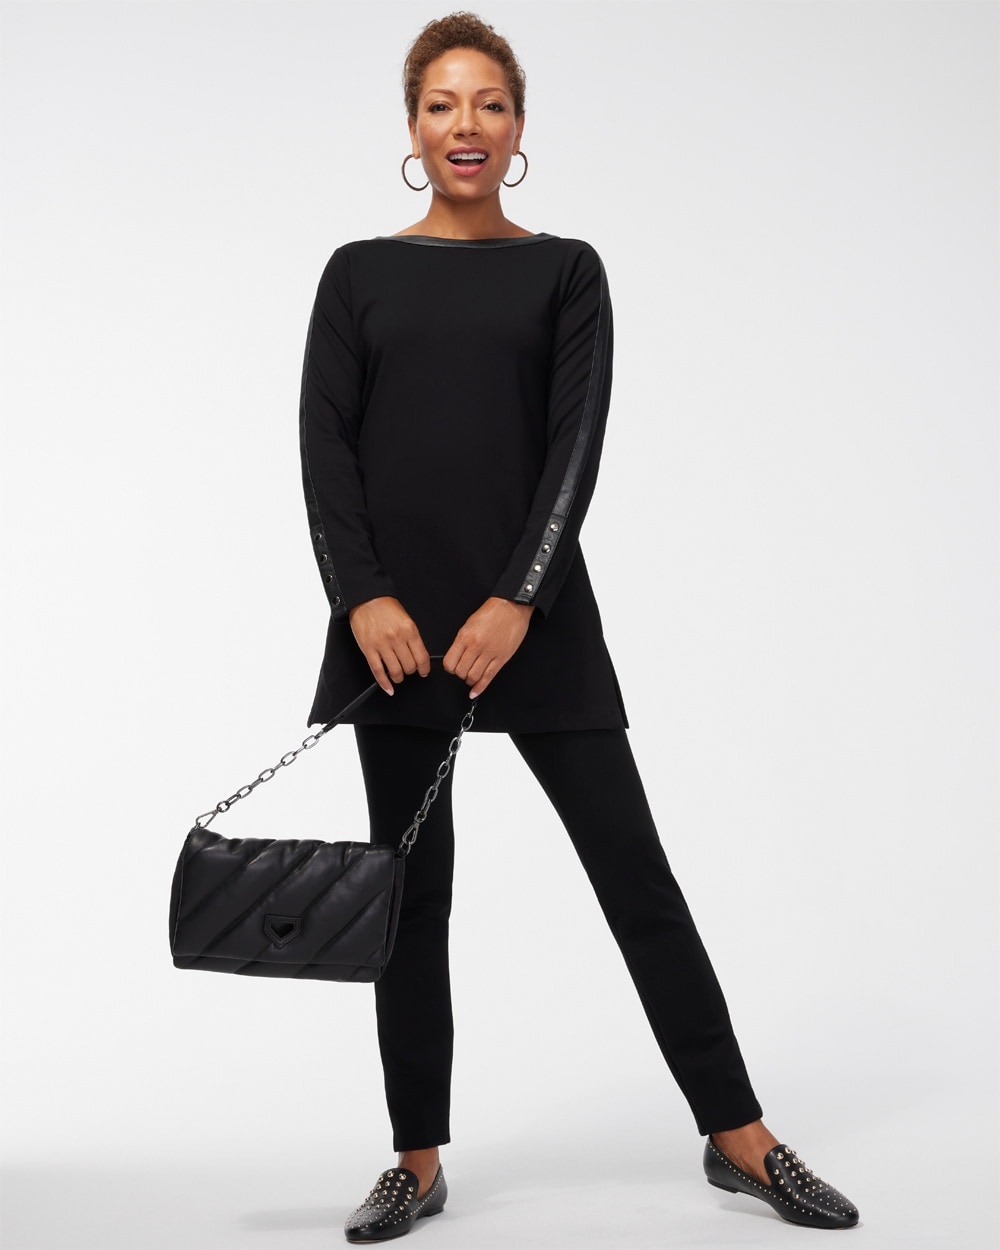 Ponte Pants for a Comfortable but Classy Look - Dressed for My Day